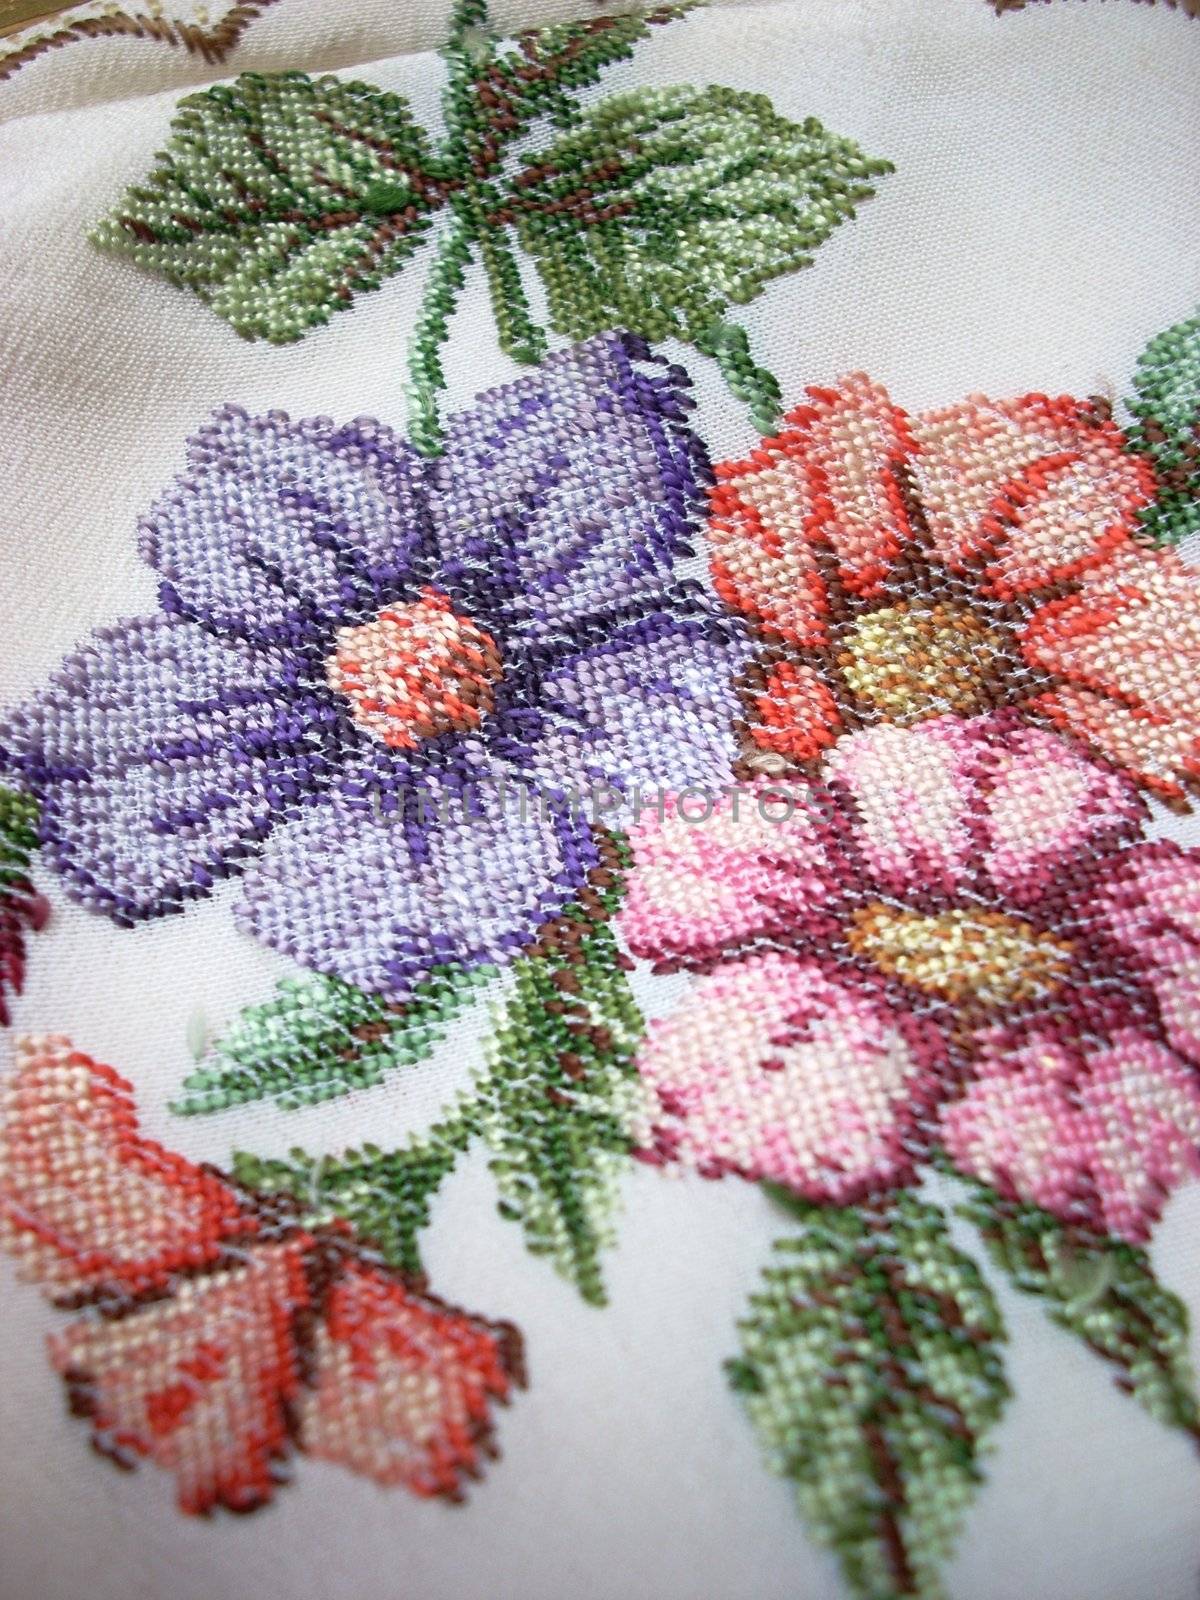 Embroidered flower texture by DOODNICK